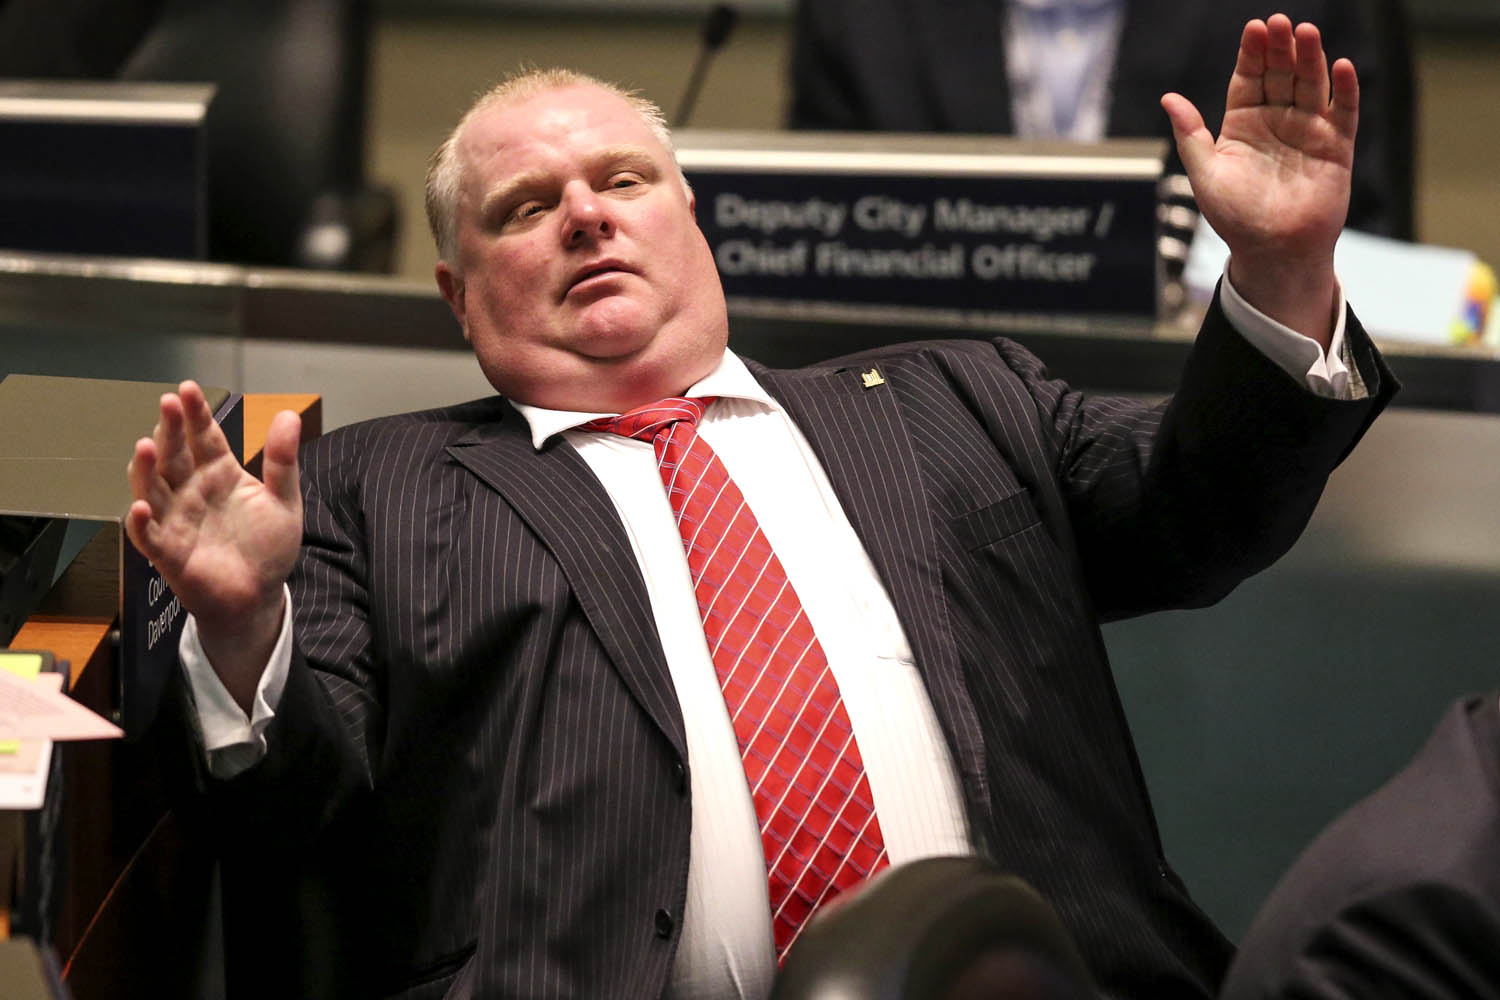 Mayor Rob Ford Stripped of Power As Mayor By Toronto Council.